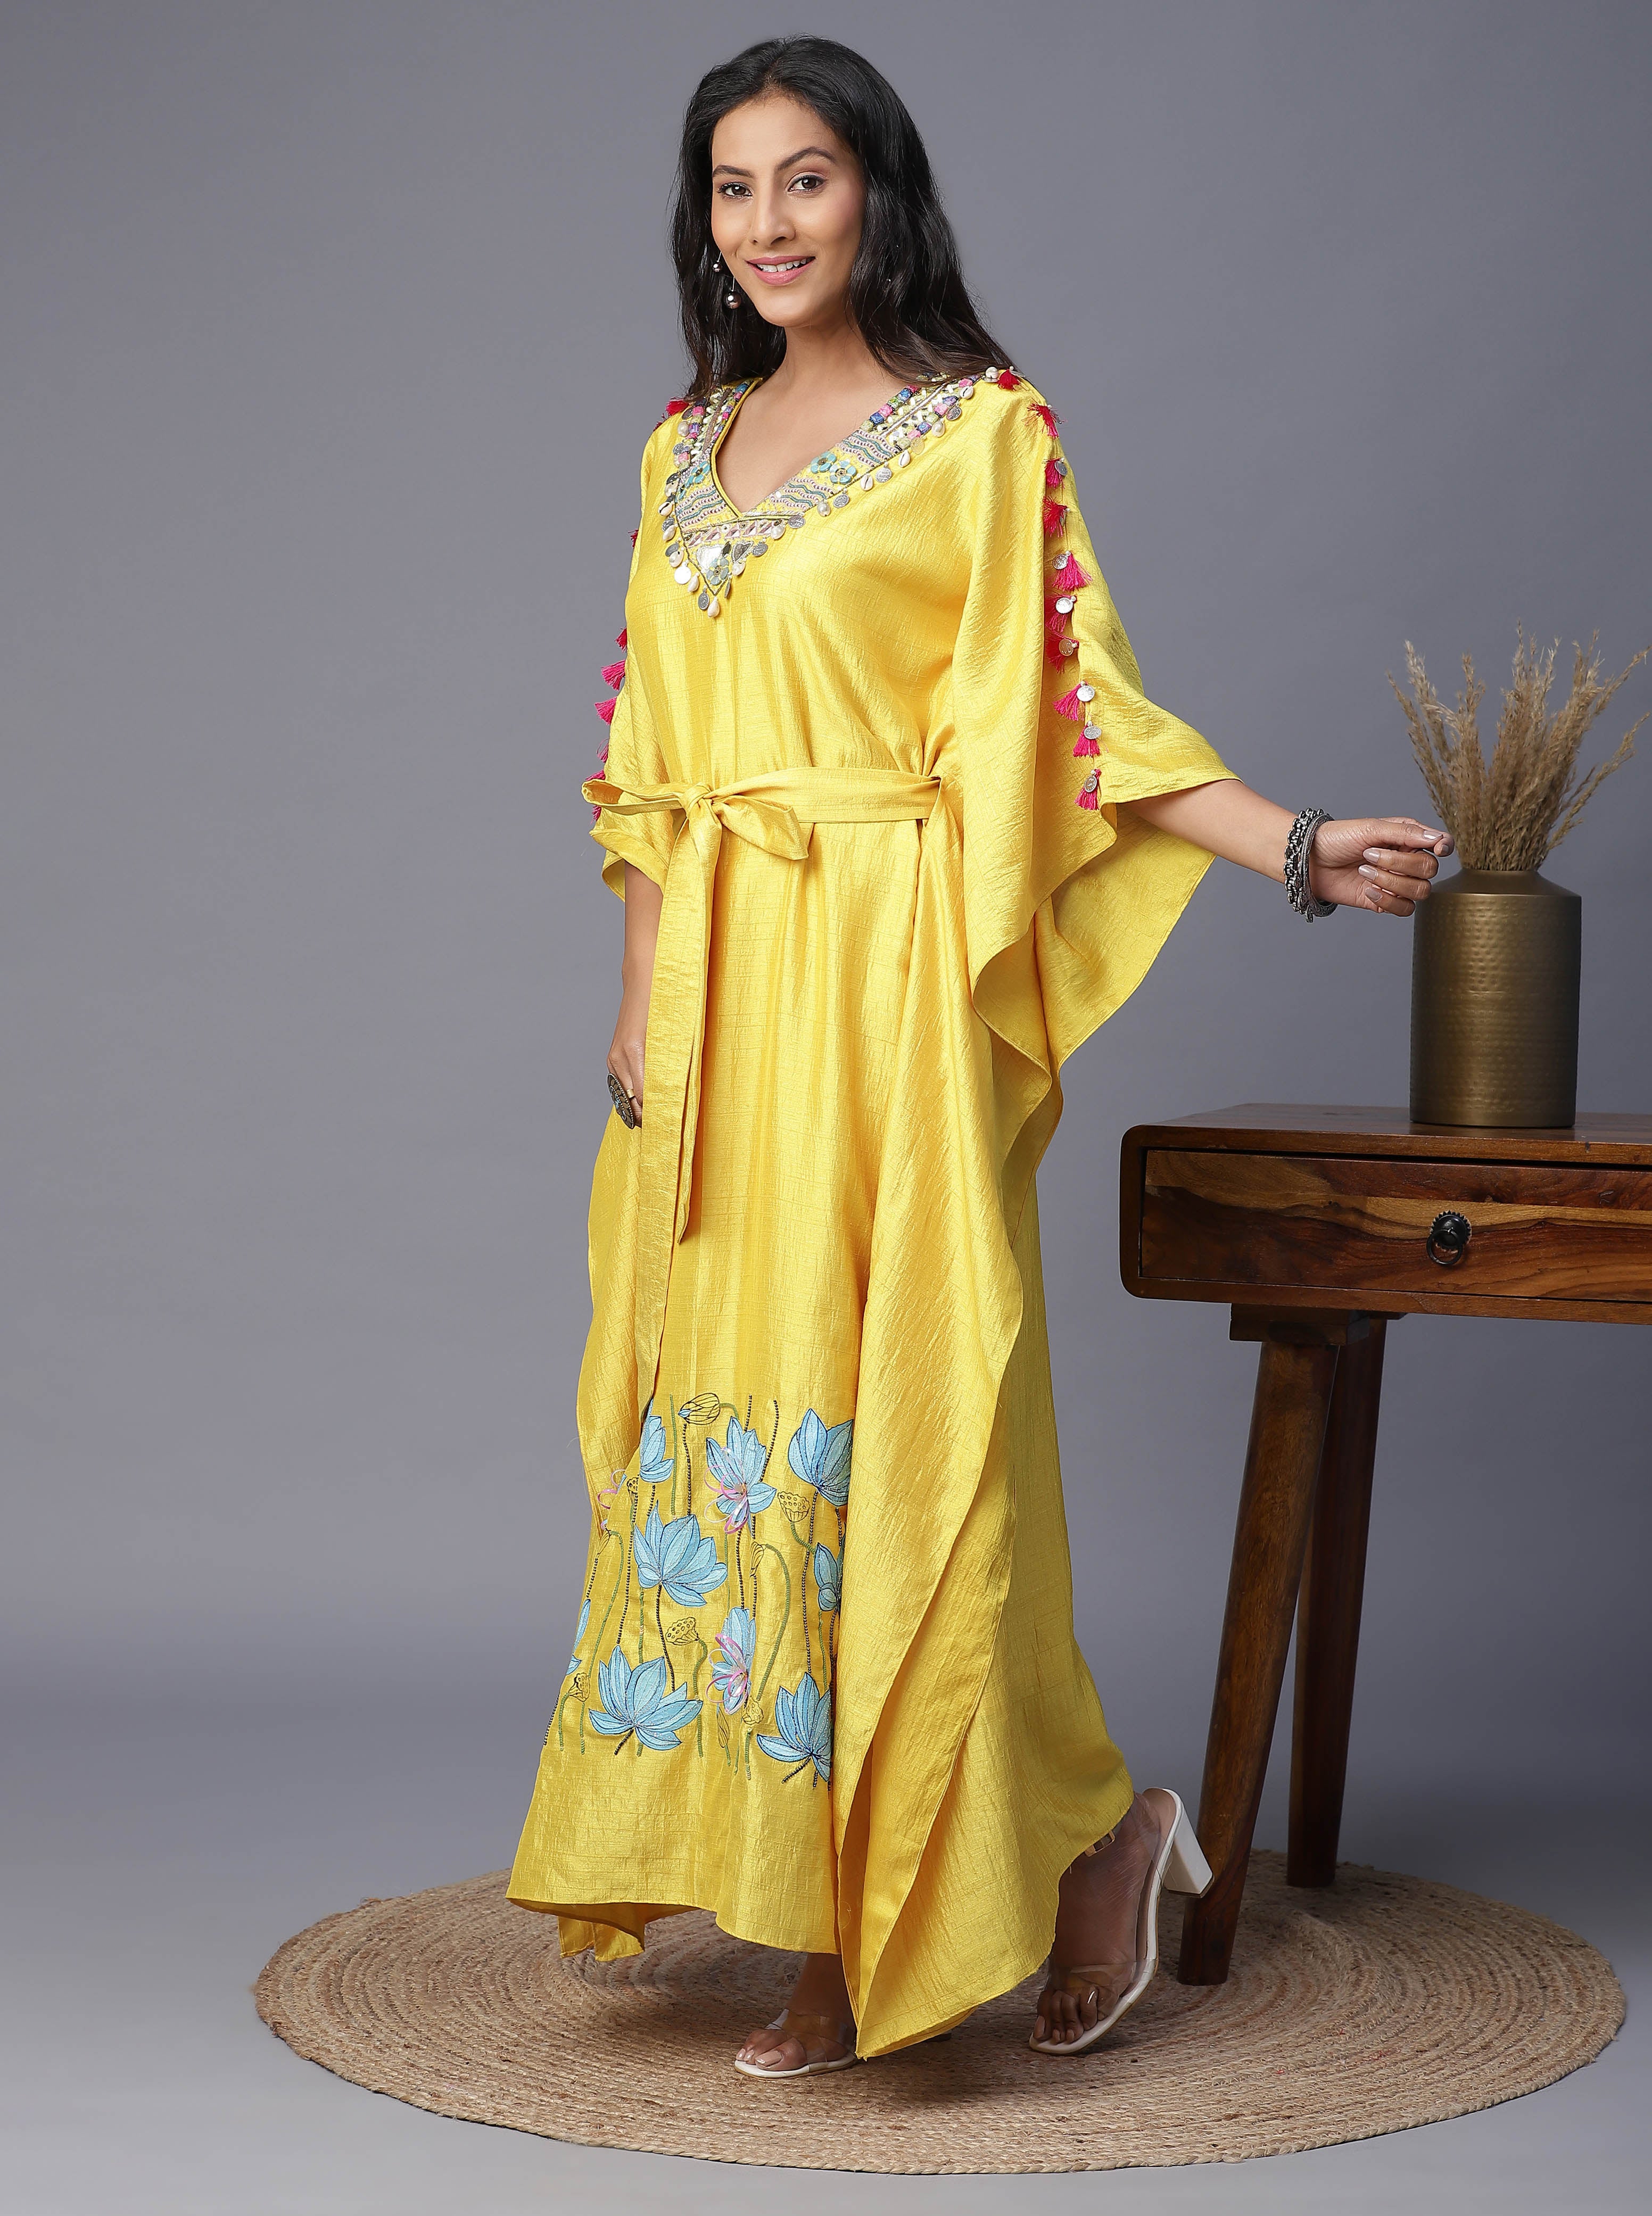 Yellow Chiffon Dress for the Beach, Sheer Kaftan With Big Floral Print,  Boho Summer Maxi Dress Perfect Swimsuit Cover Up, Yellow Sun Dress - Etsy  Sweden